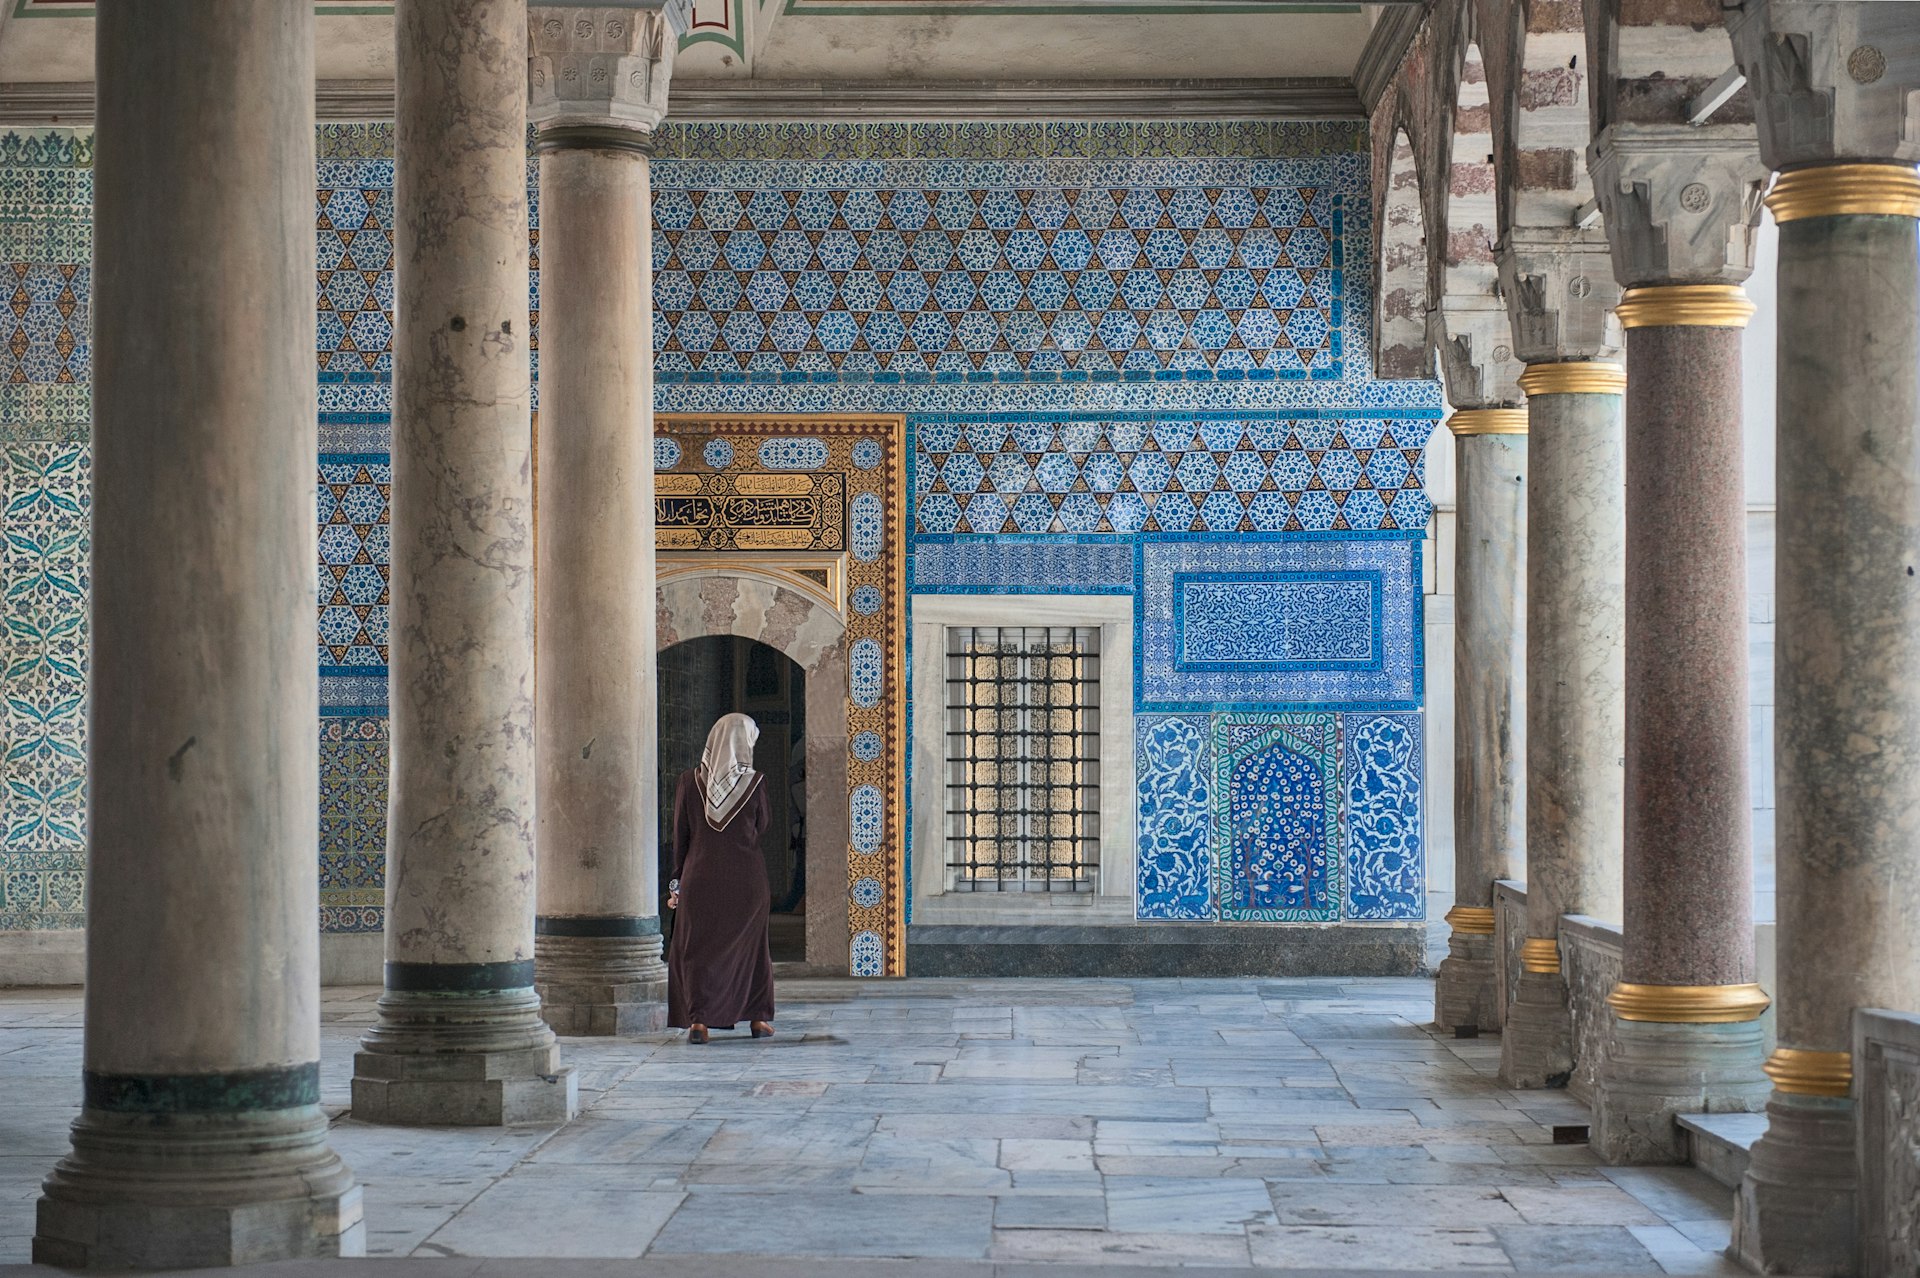 Woman walking by the ornate tiled interior of Topkapi Palace, Istanbul